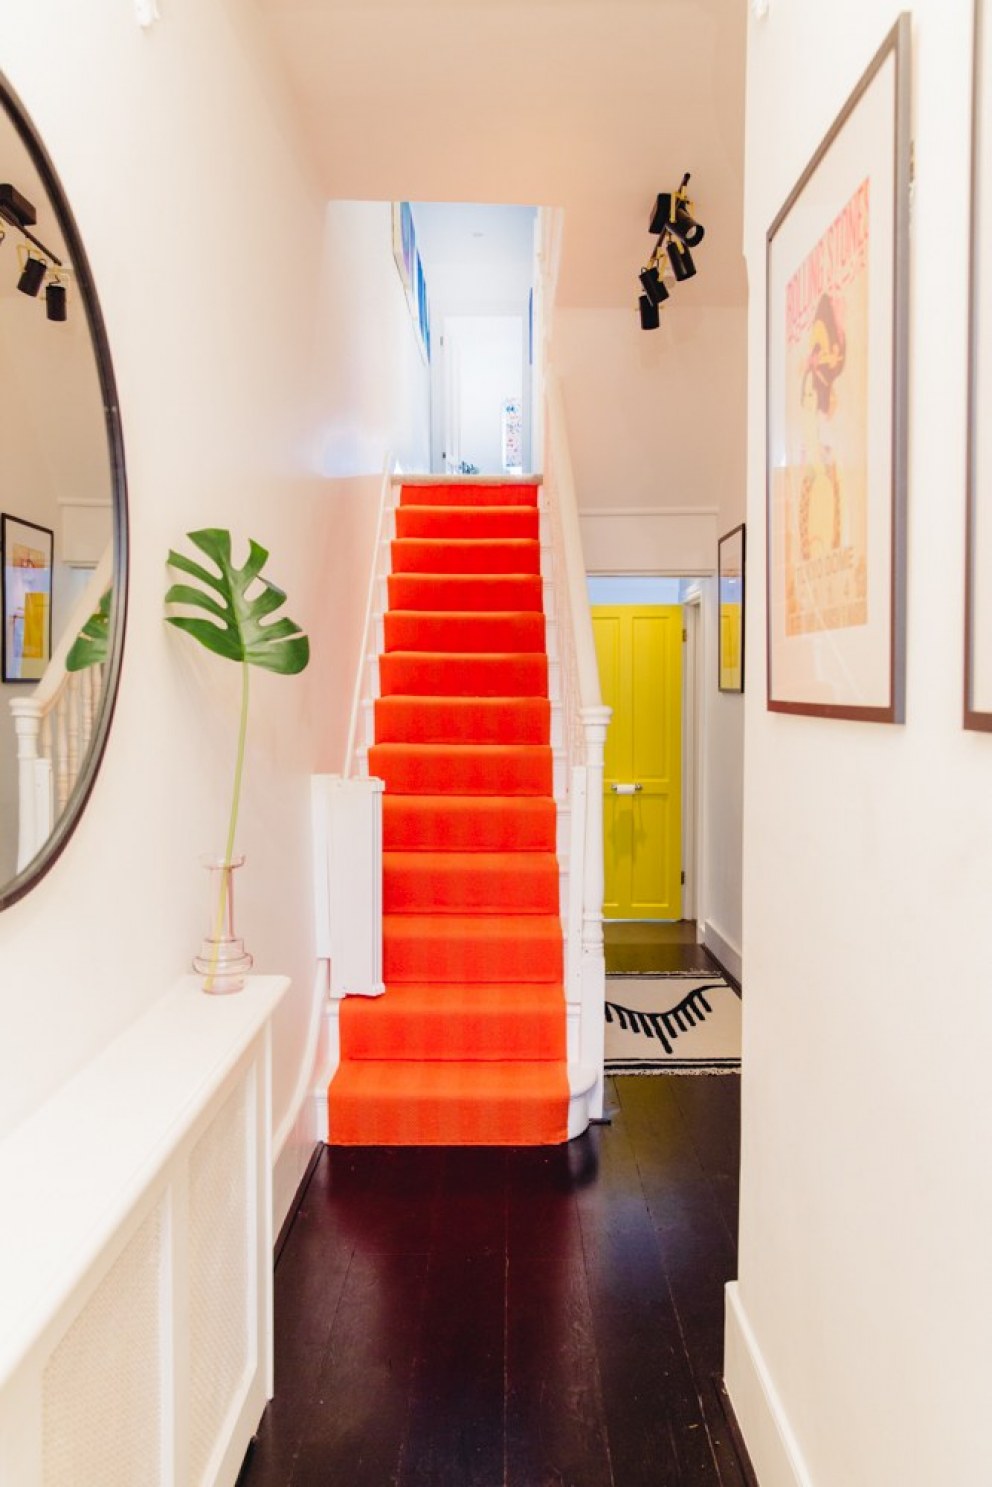 Wandsworth Town Townhouse | Entrance Hall | Interior Designers